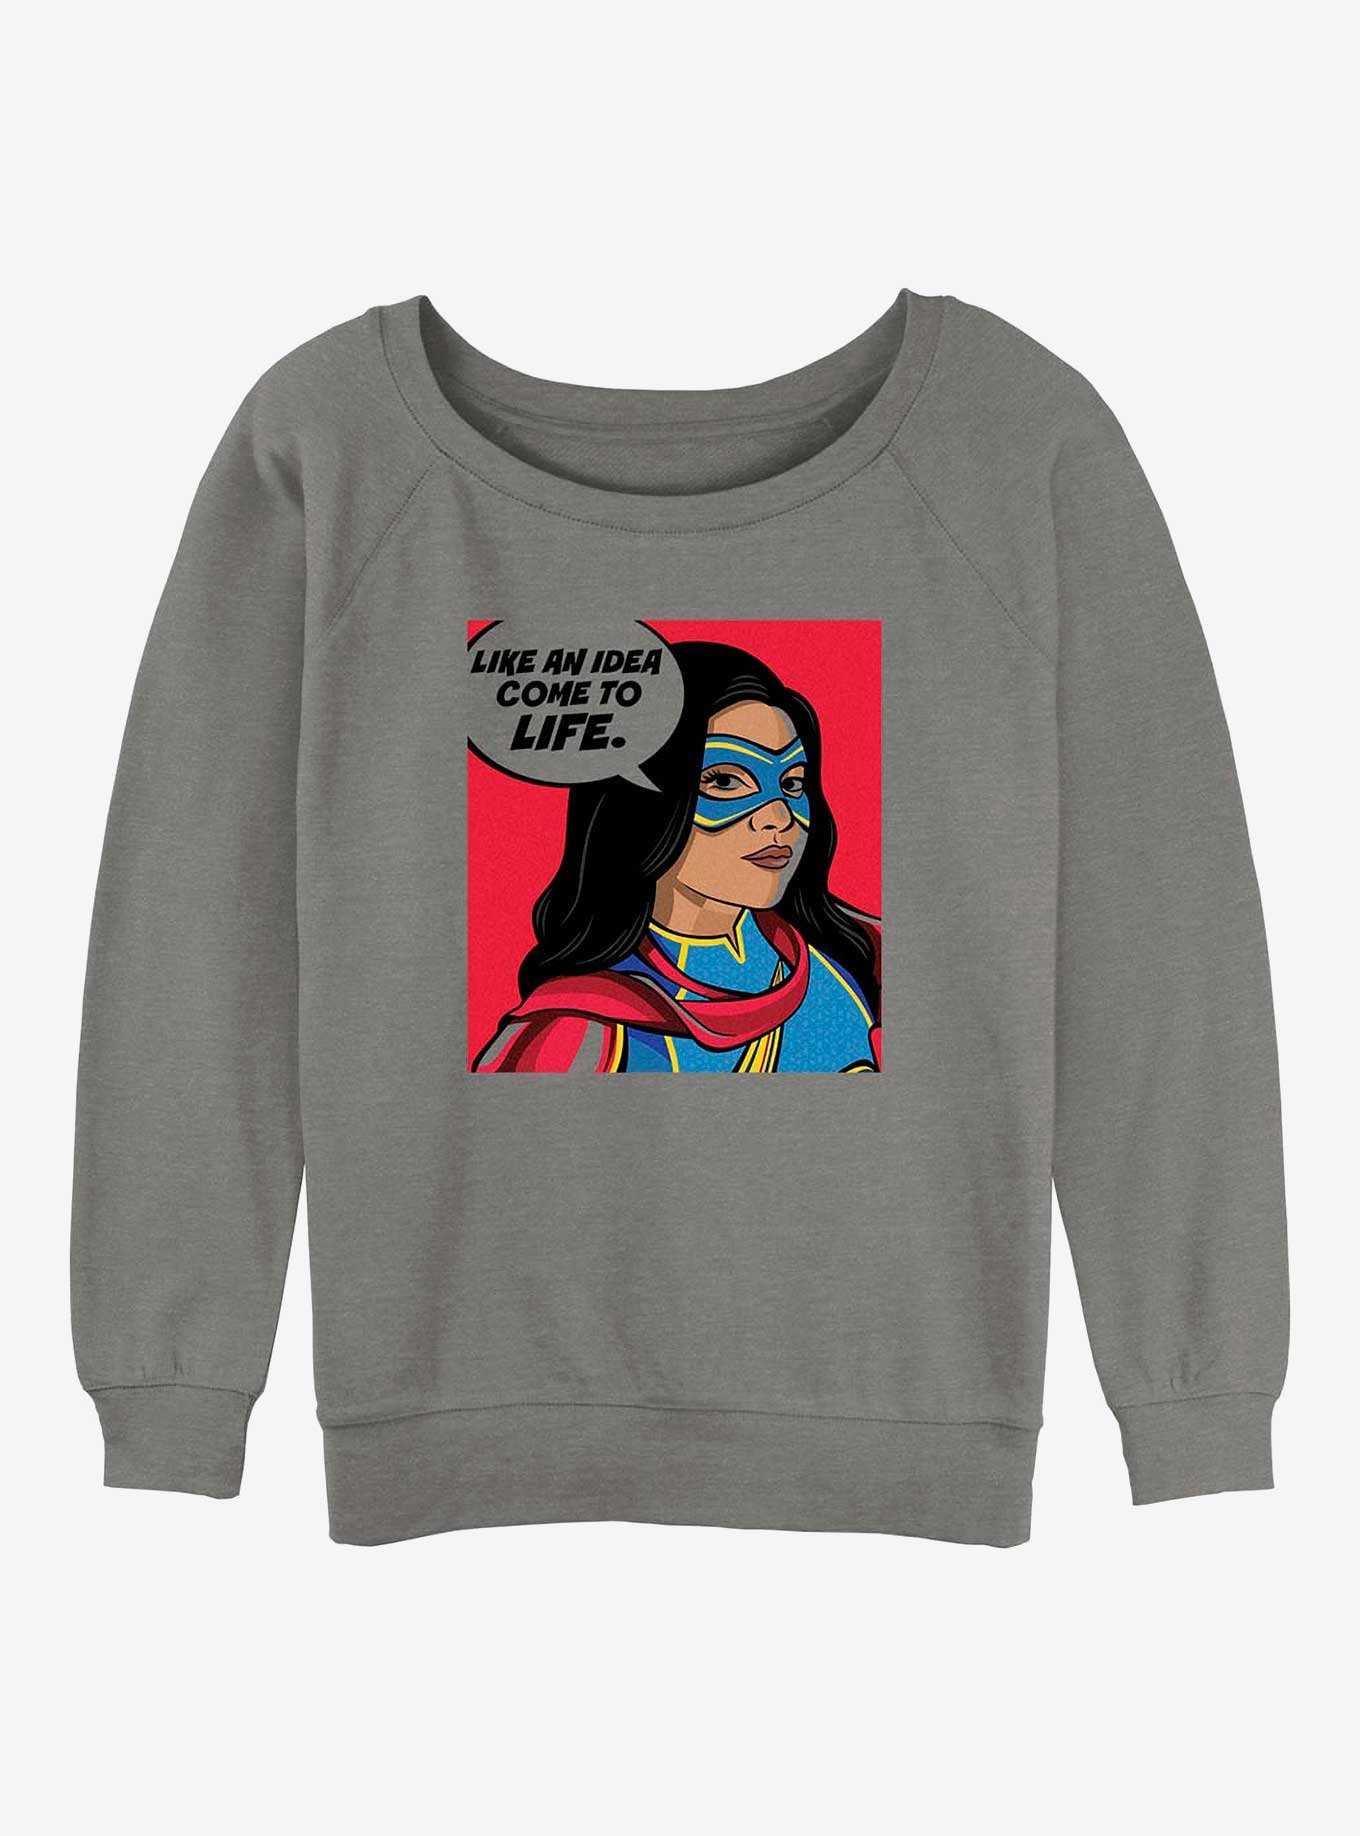 Marvel Ms. Marvel Idea Come To Life Girls Slouchy Sweatshirt, , hi-res